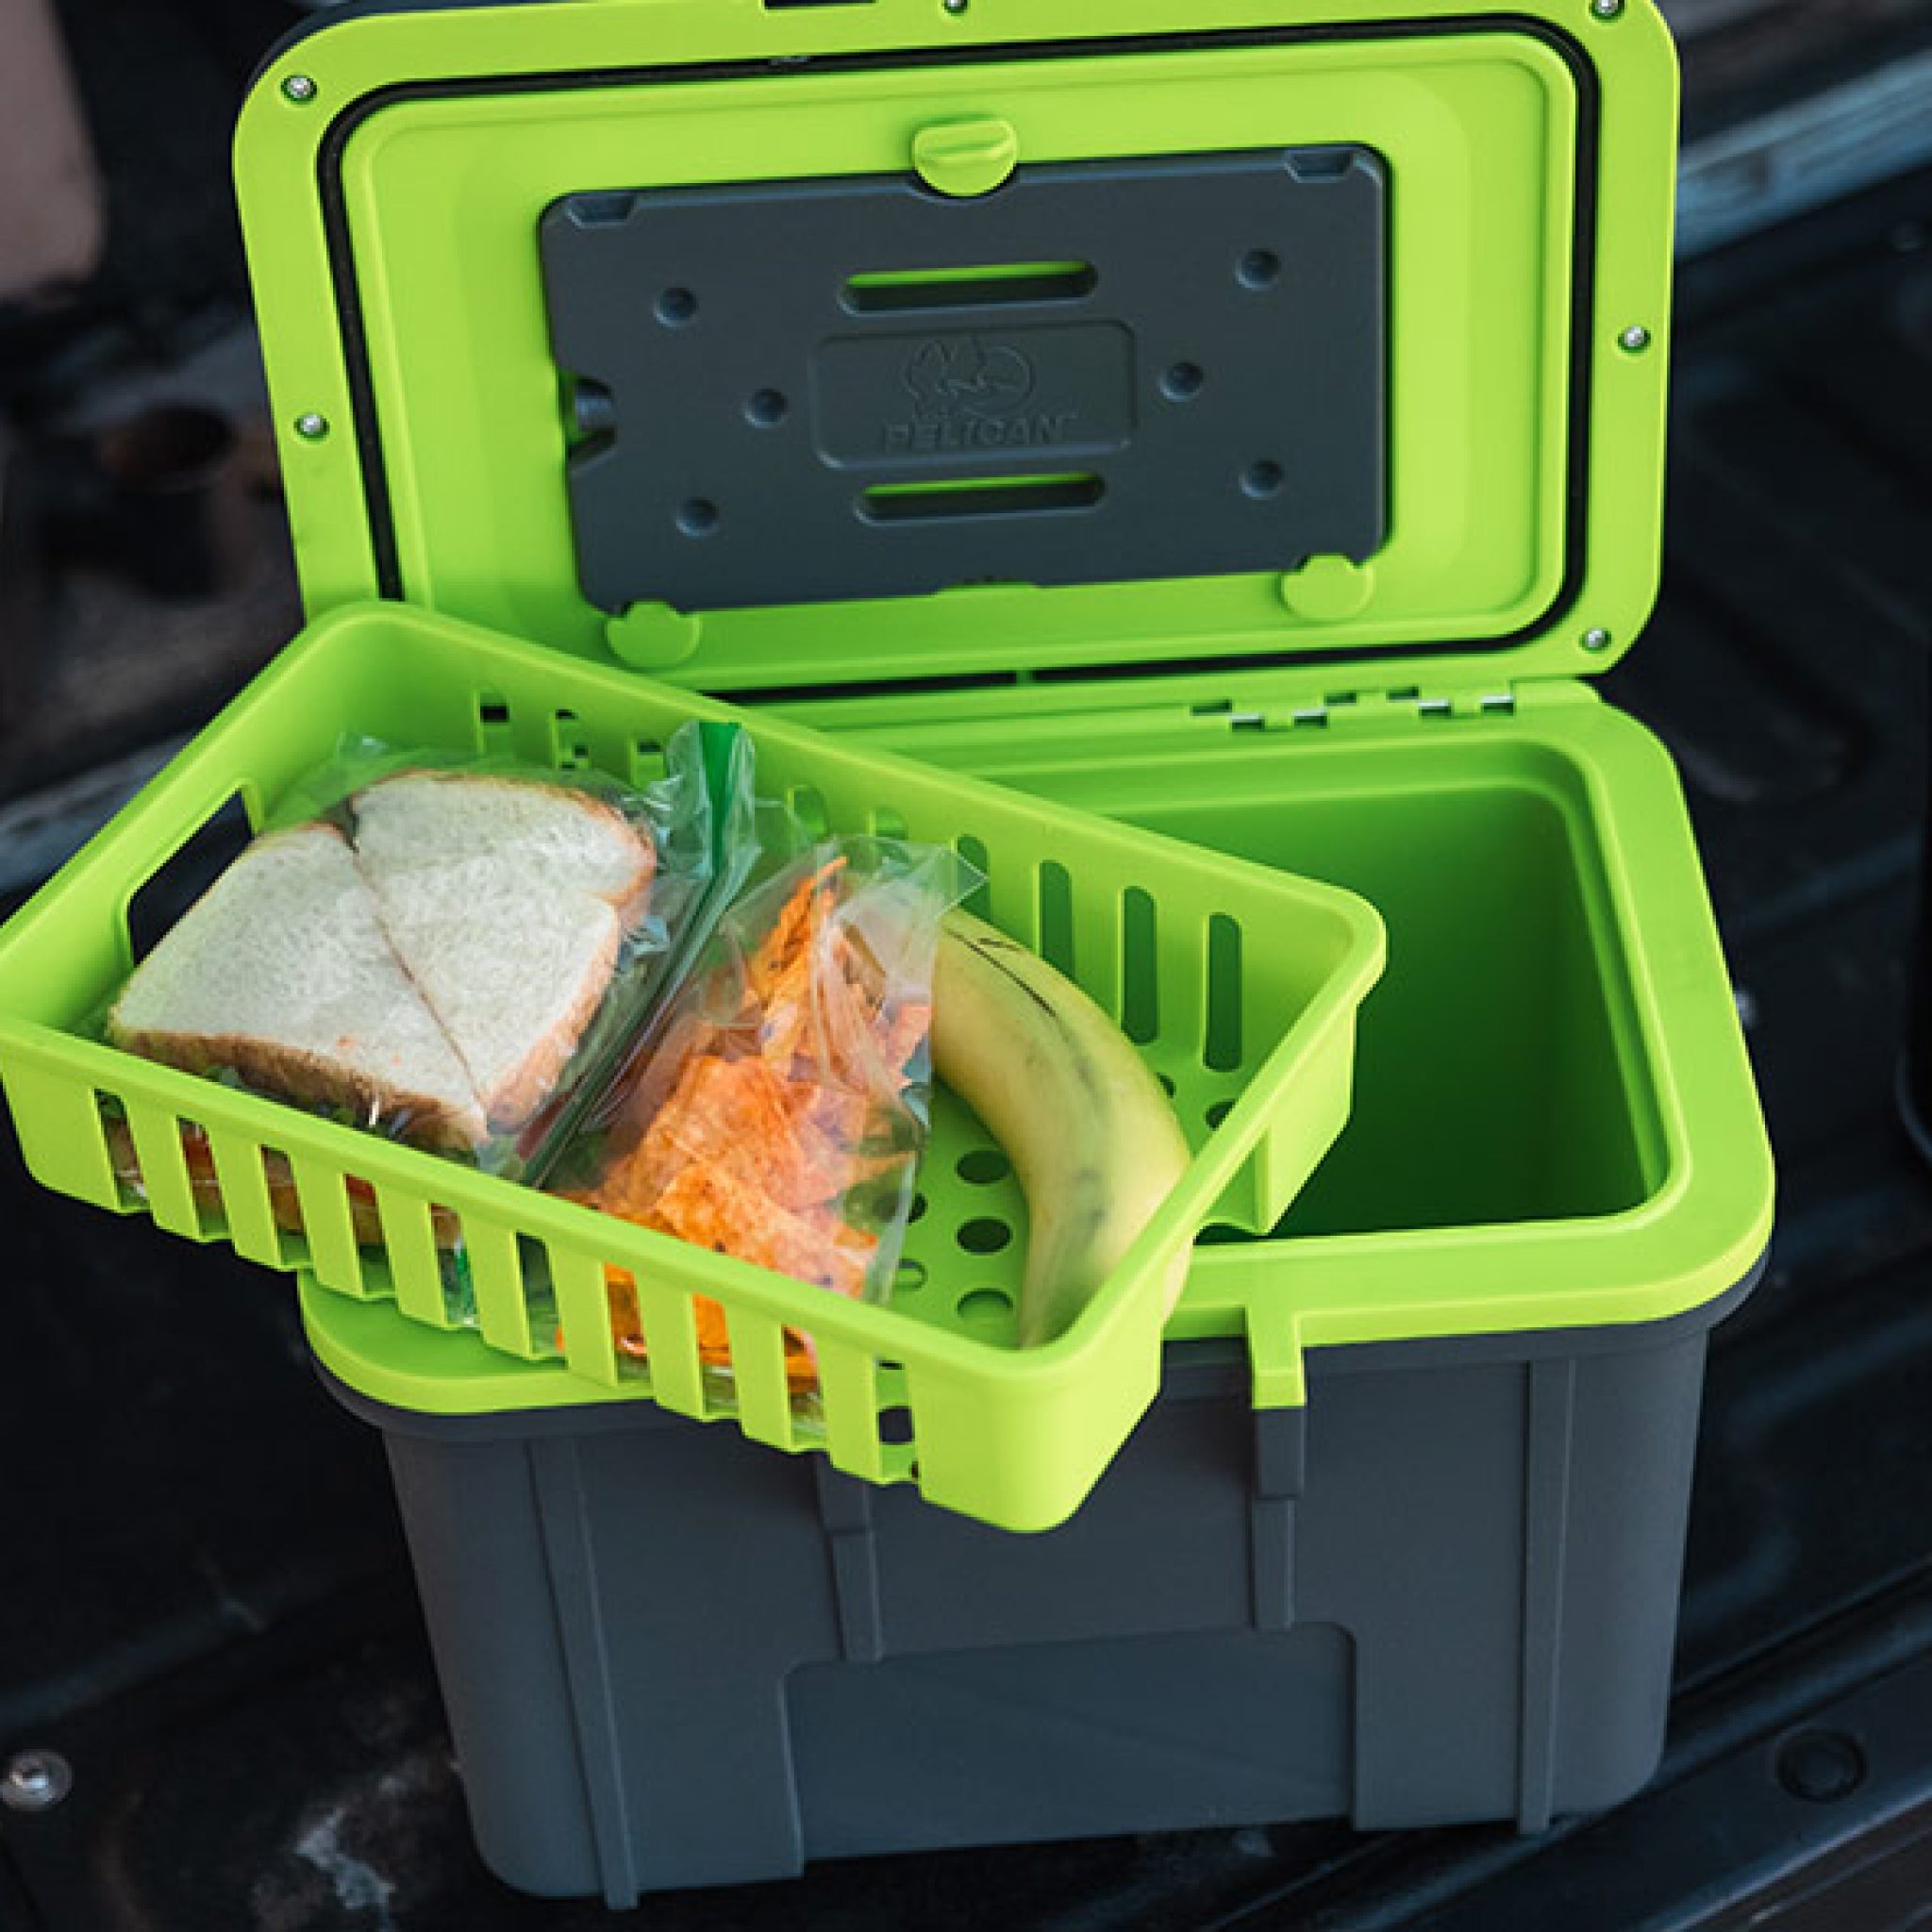 Dark Grey / Green Pelican 8QT personal lunchbox cooler with built-in ice pack & organizing tray